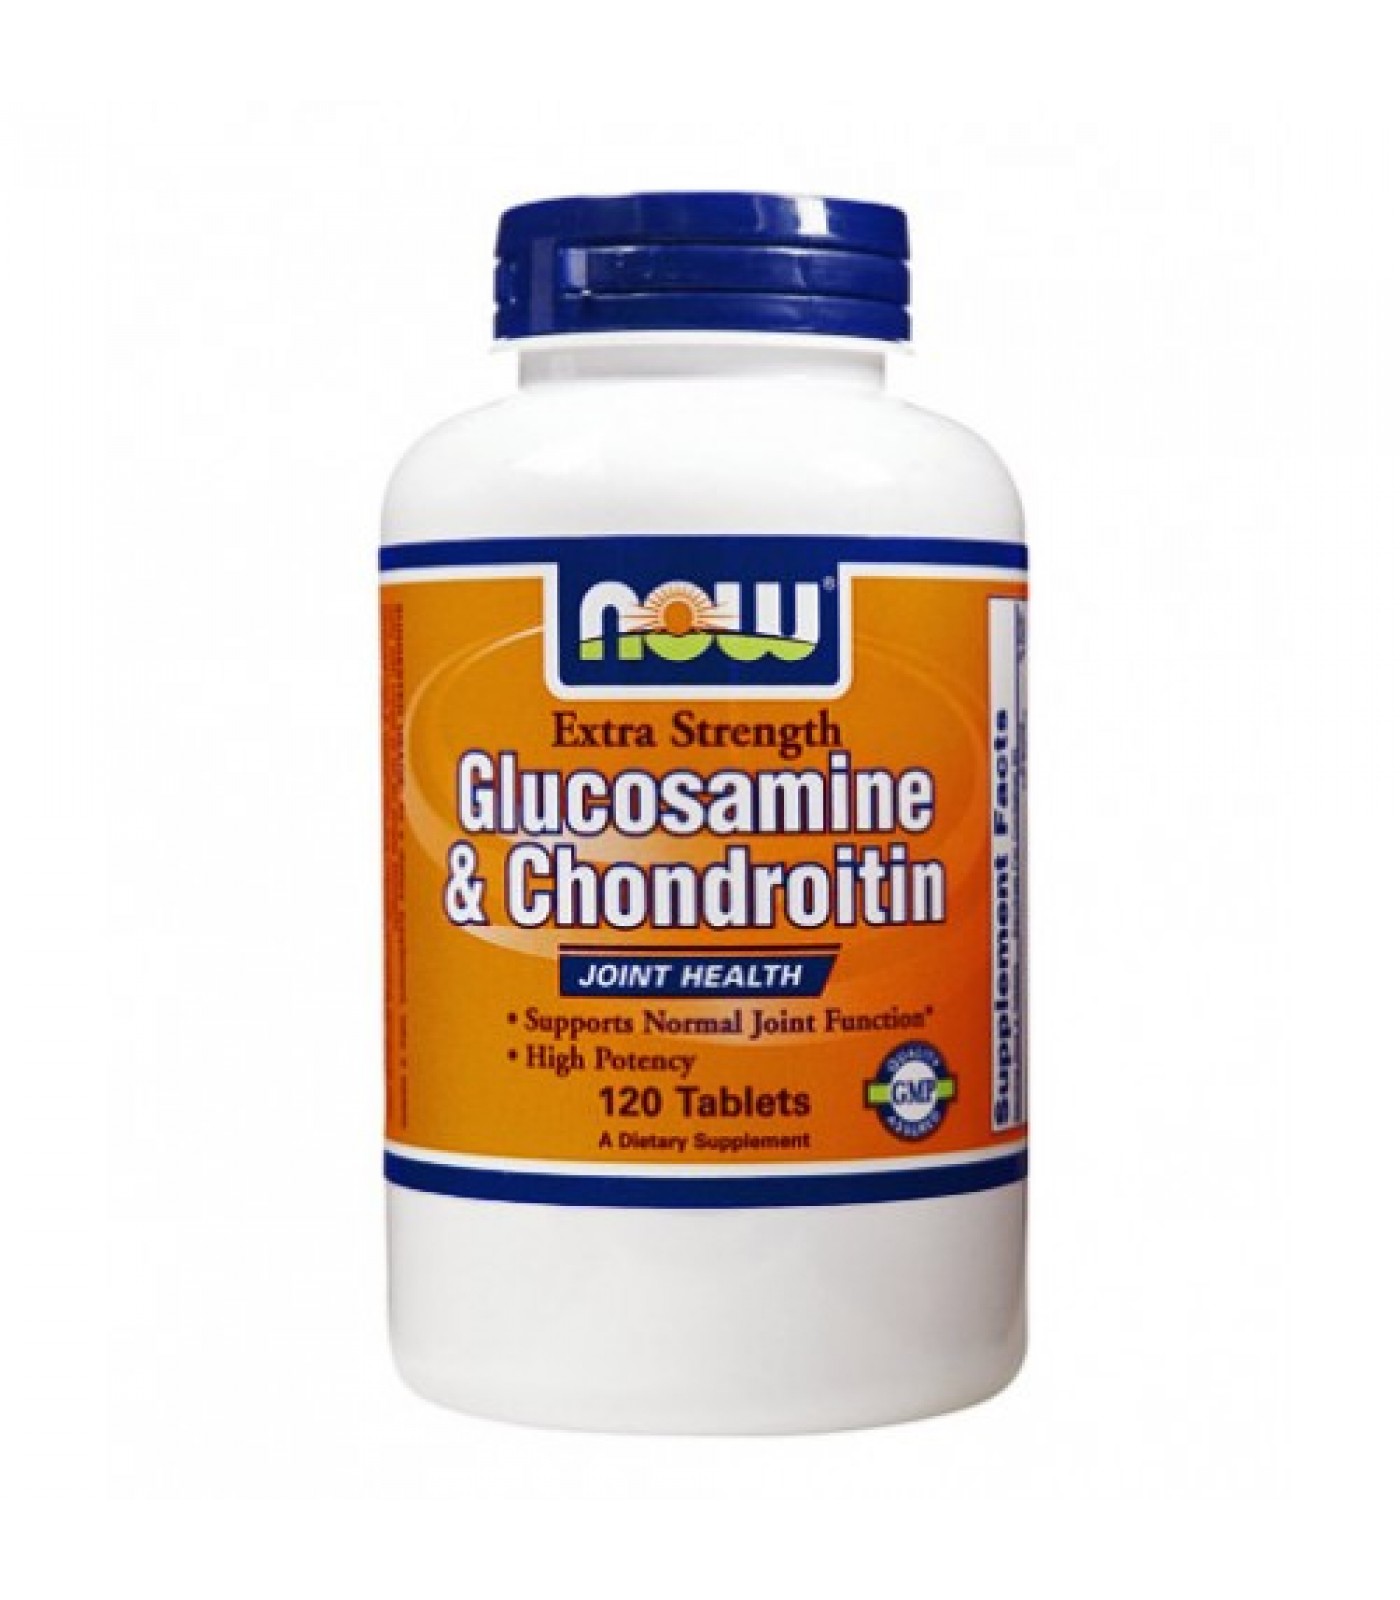 NOW - Glucosamine & Chondroitin Sulfate Extra Strength / 120 Tabs.